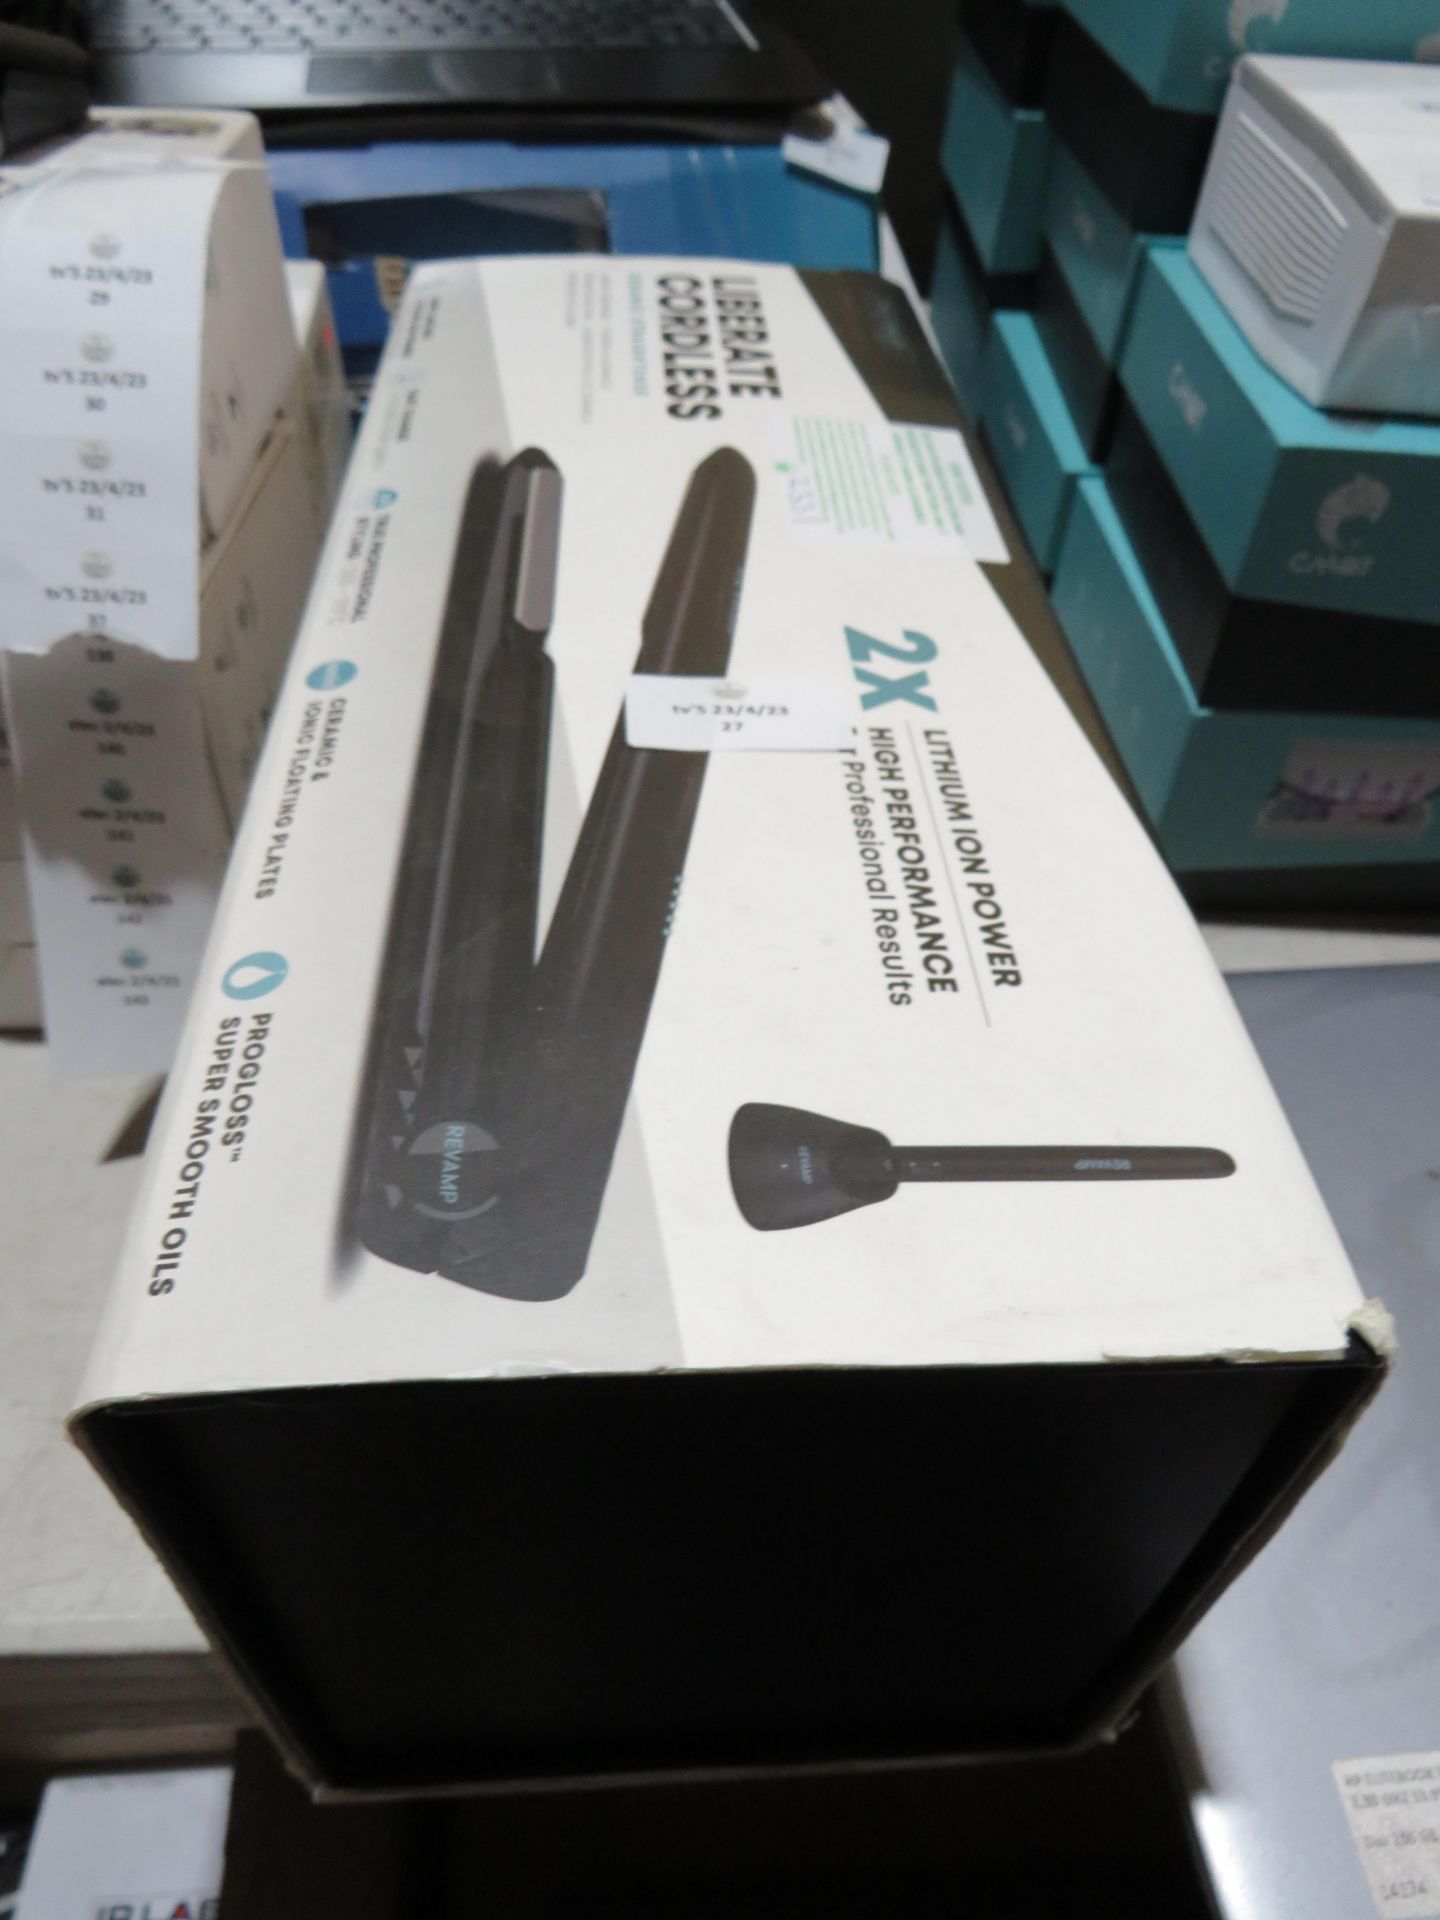 Revamp Liberate cordless hair straighners, tested working for heat.